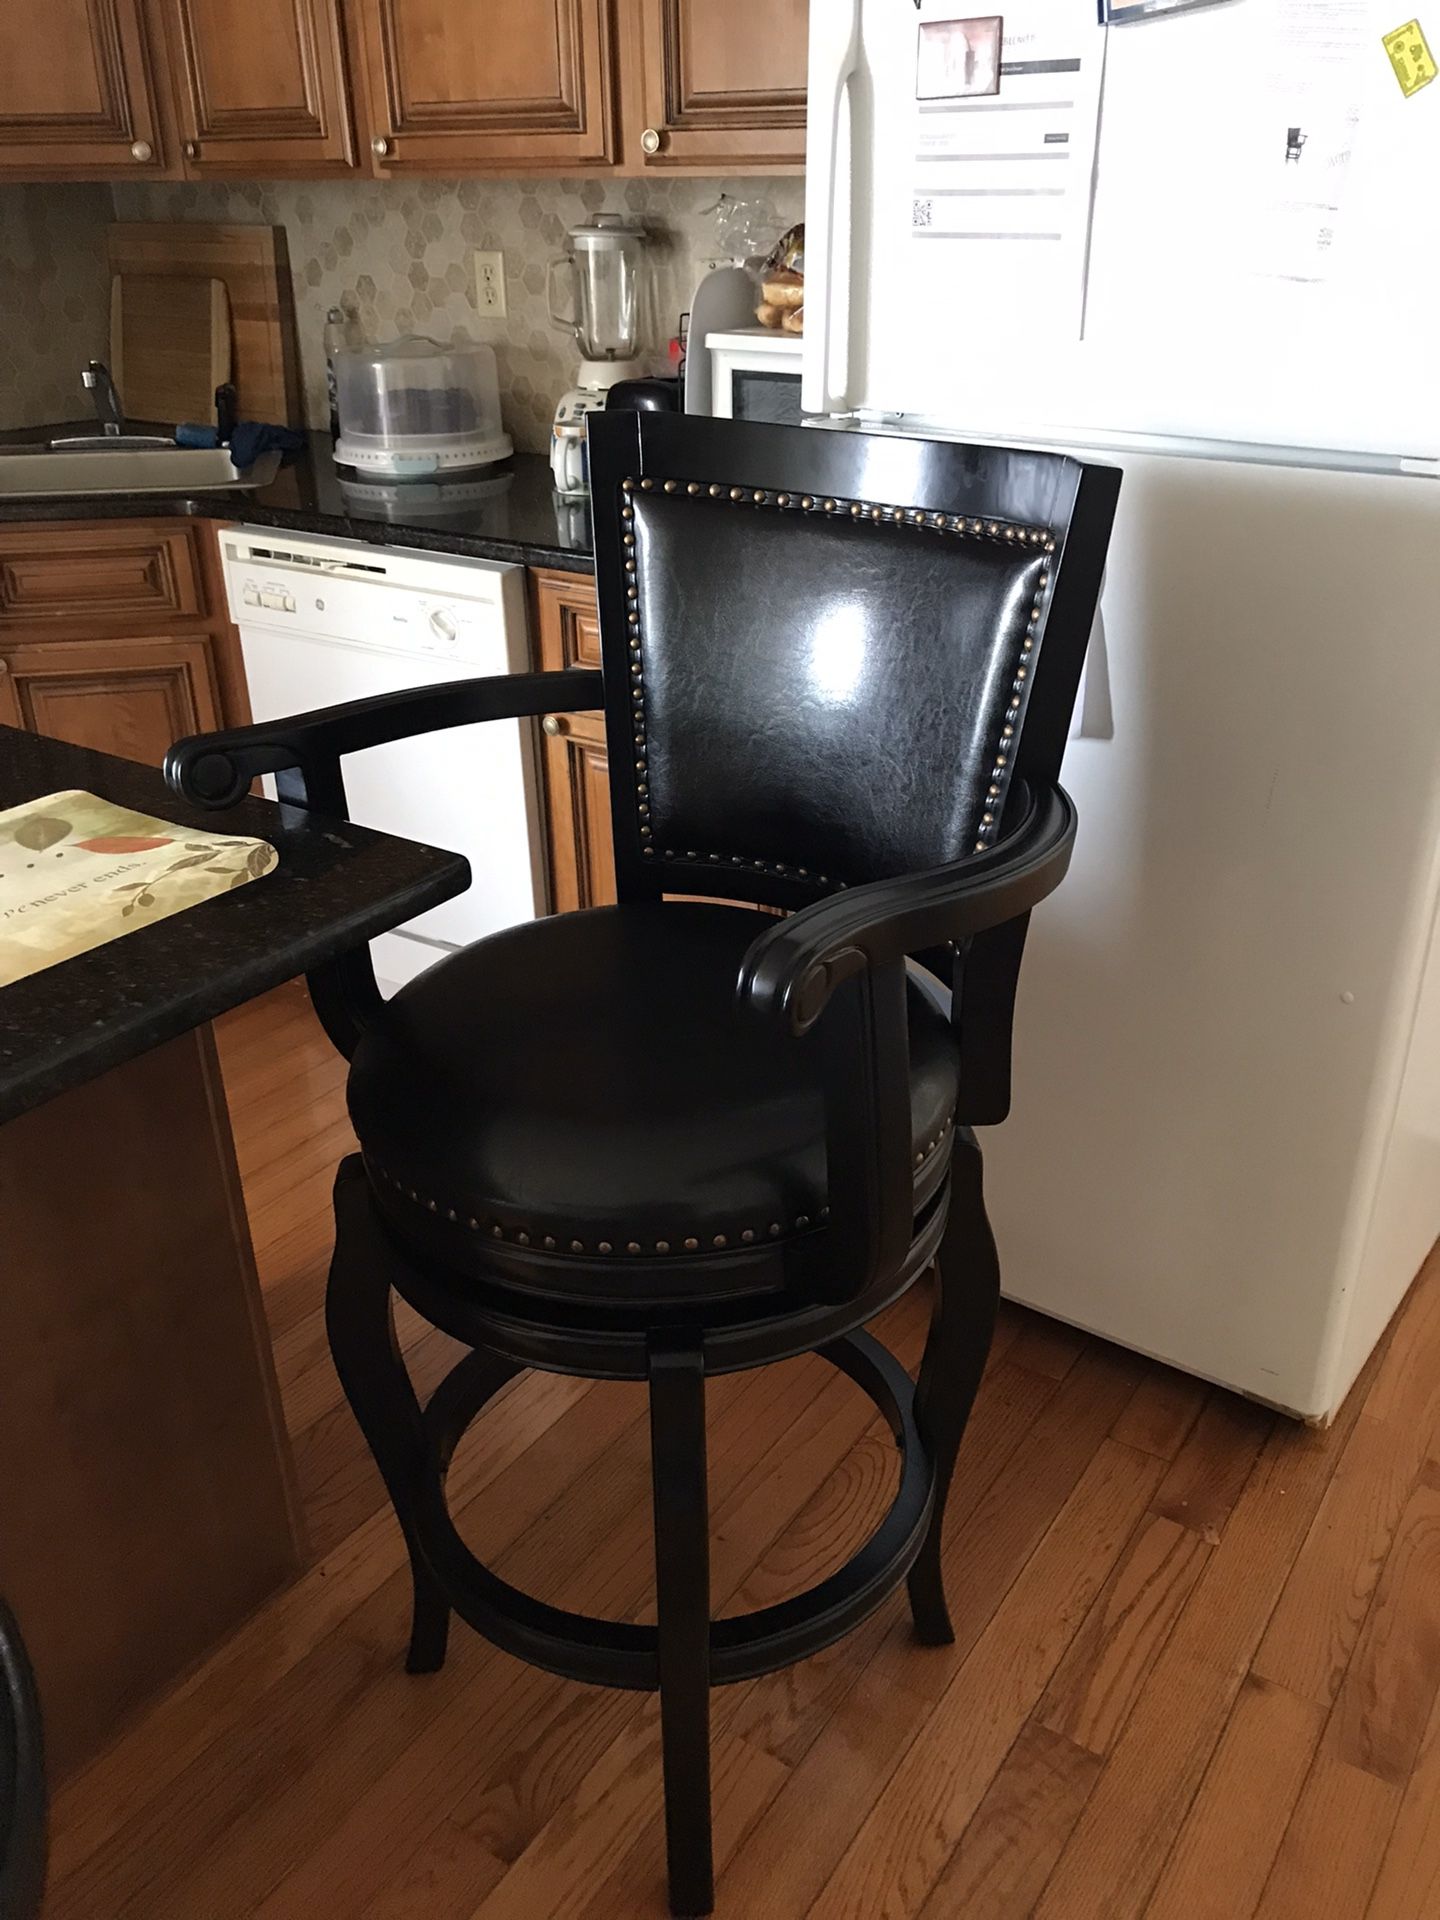 2 Brand New Swivel Bar Stools. Must sell. Getting Dinette. $325.